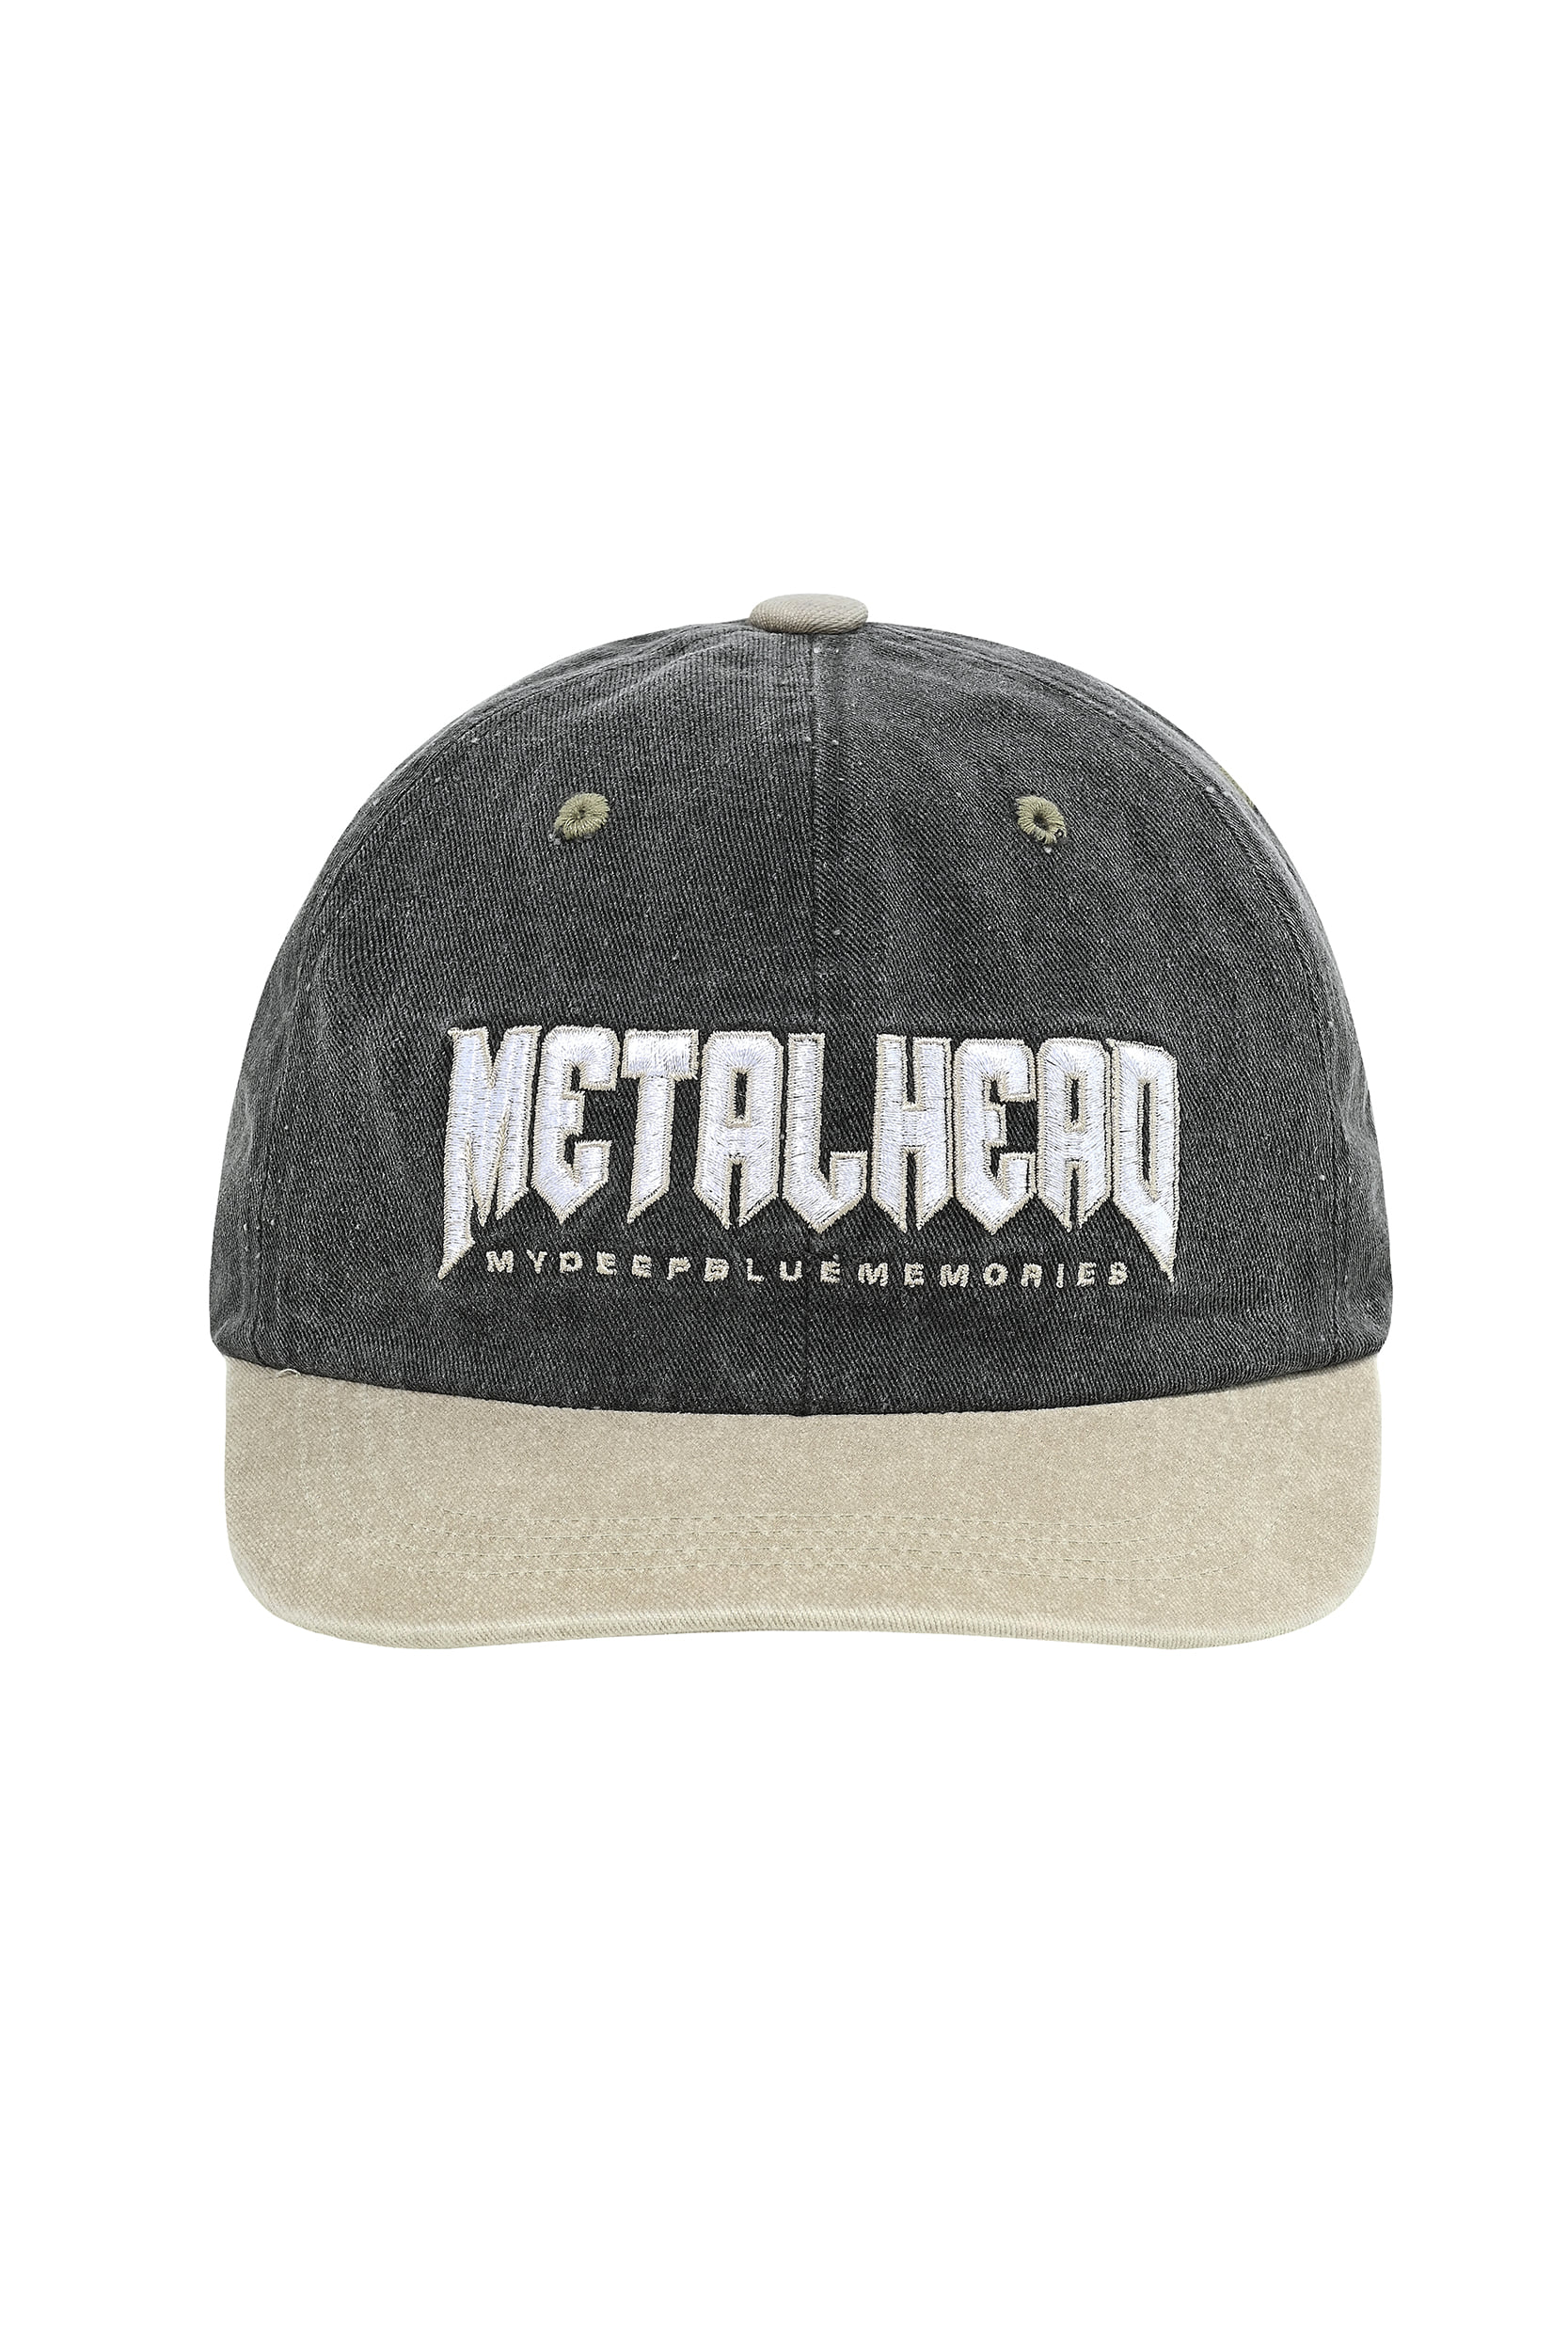 METALHEAD COLORATION WASHED CAP